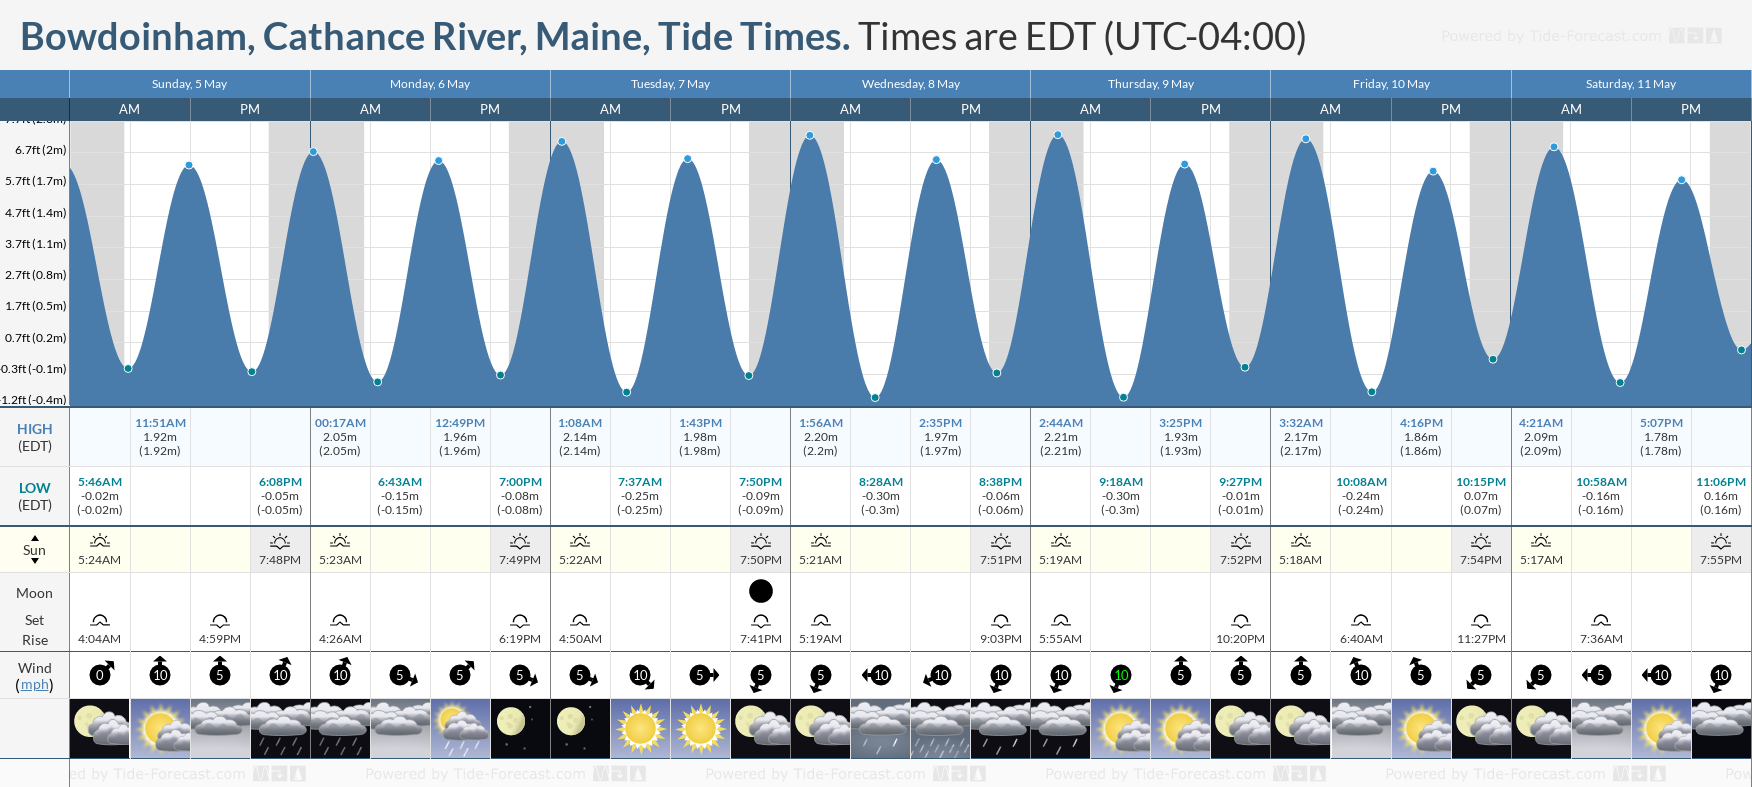 Bowdoinham, Cathance River, Maine Tide Chart including high and low tide tide times for the next 7 days